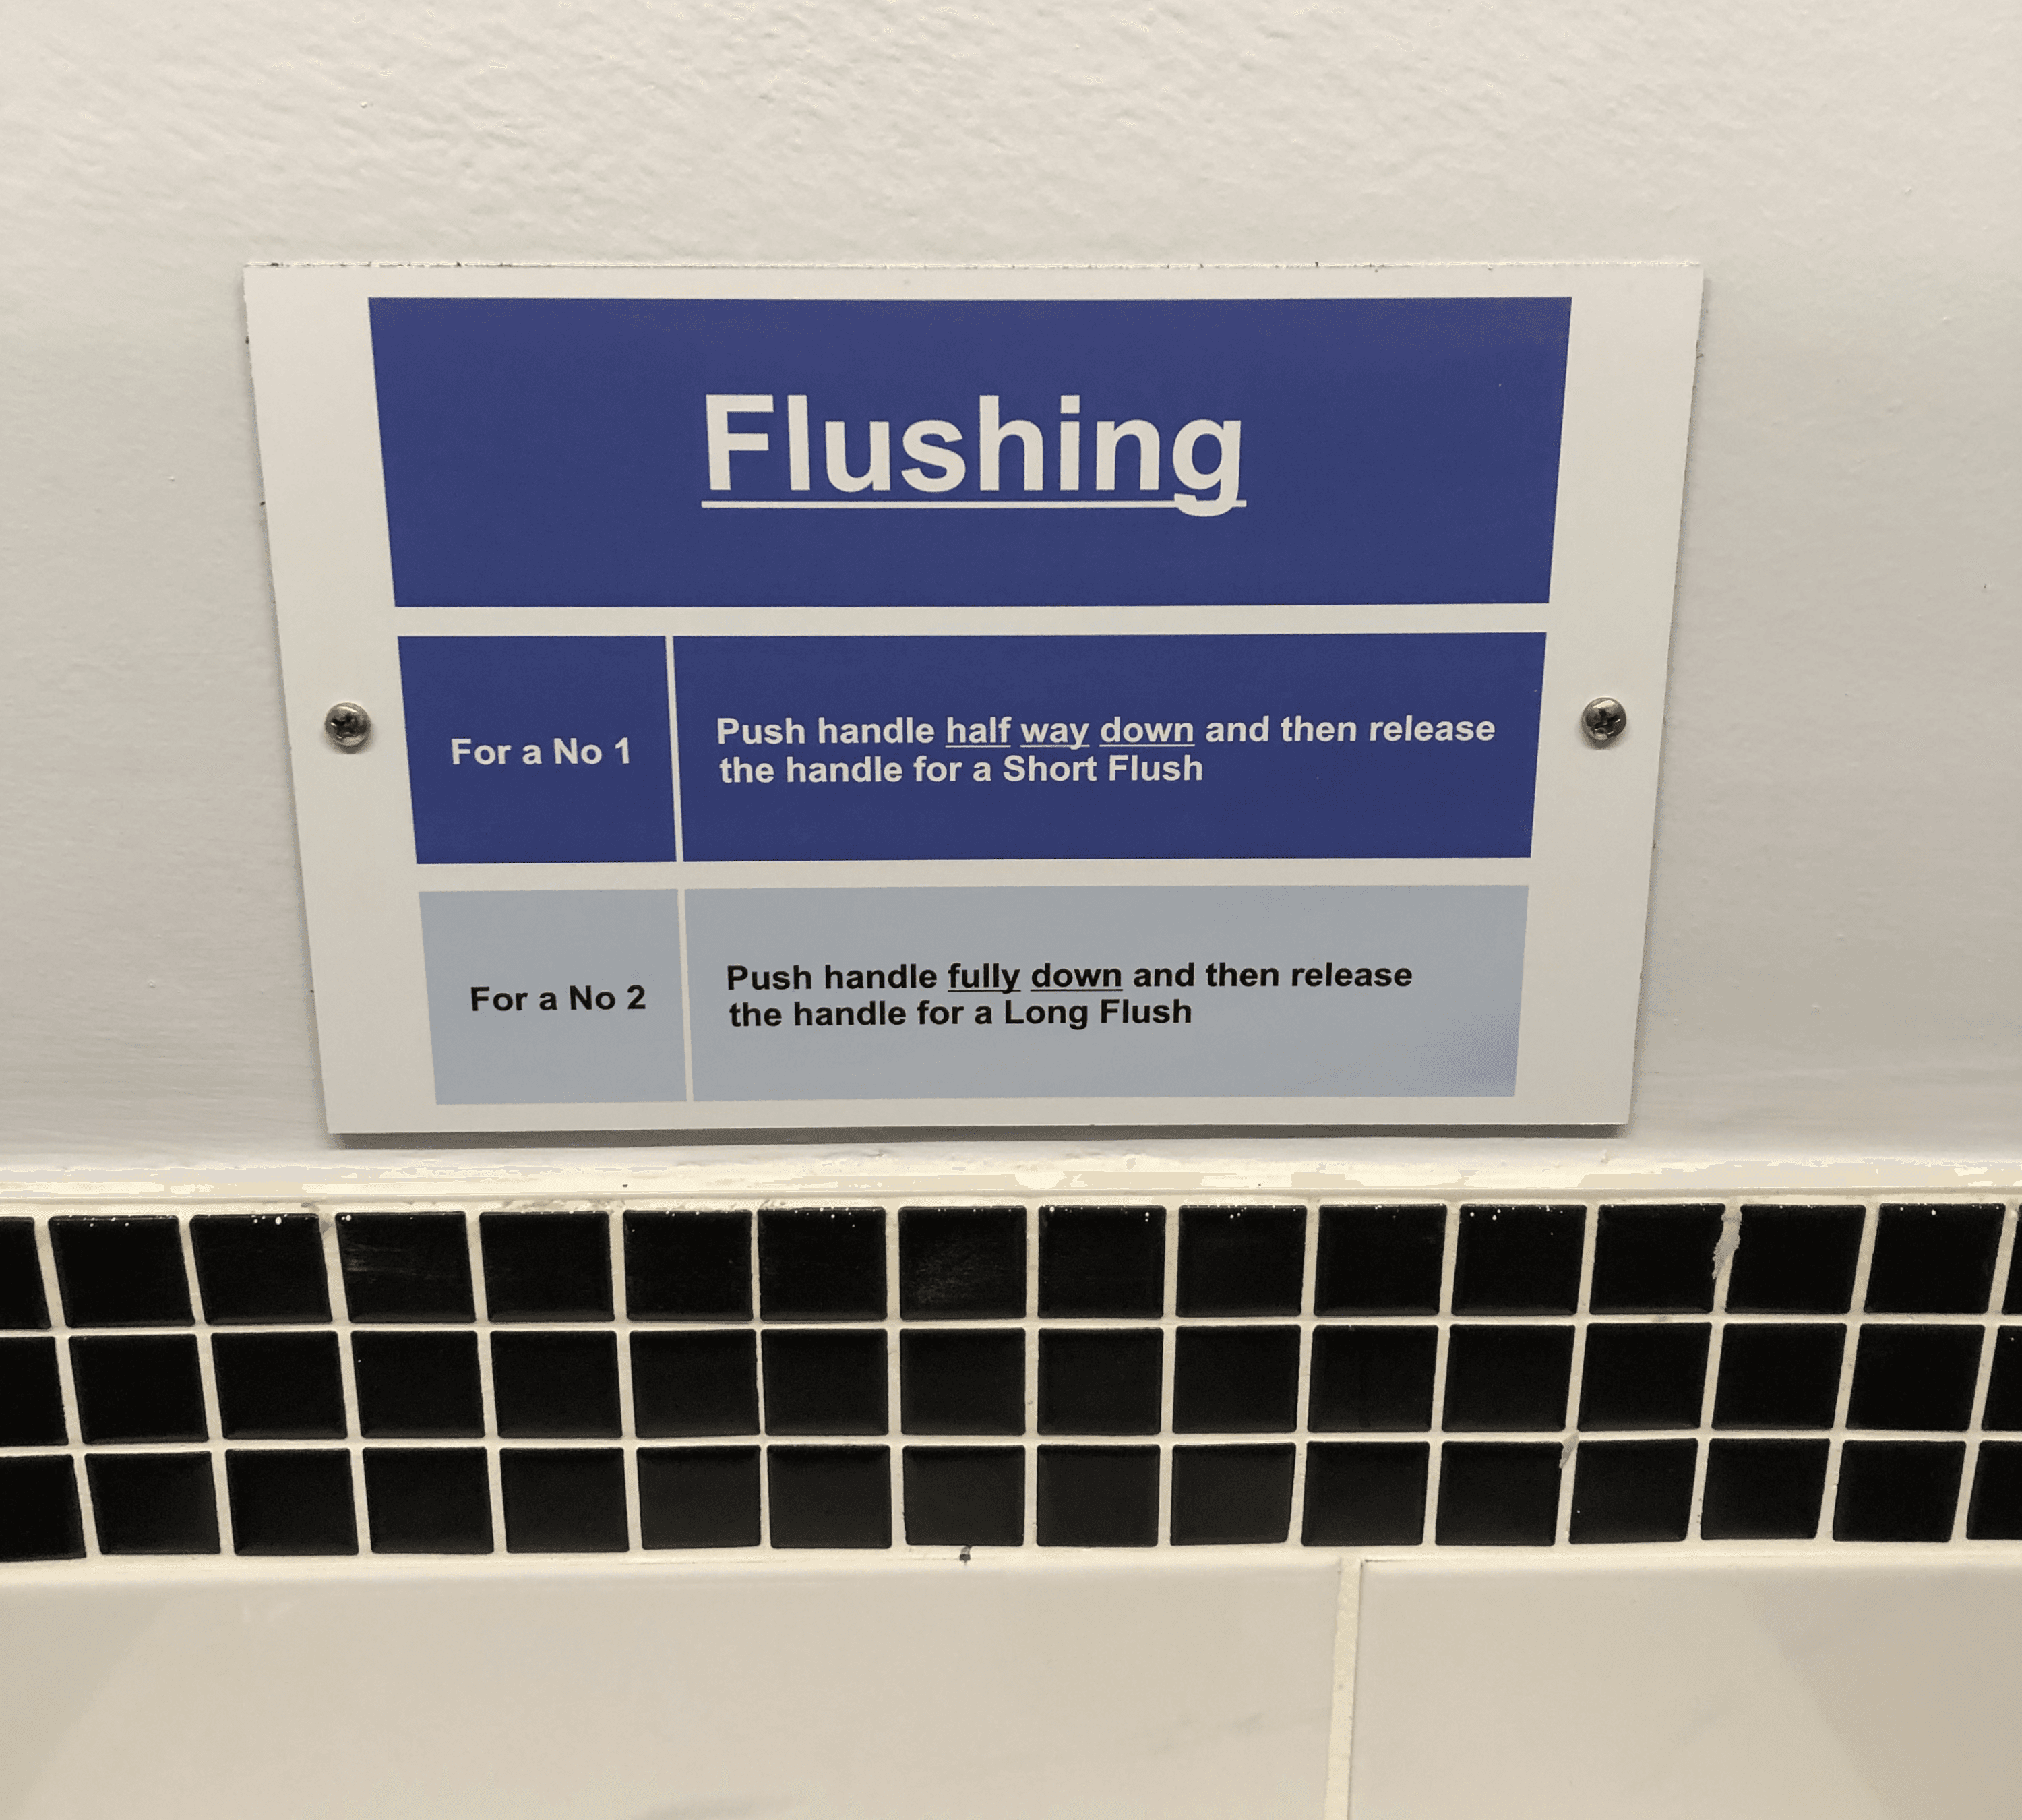 A sign providing instruction how to use the flushing system. For a no 1, pull the handle half-way down; for a no 2 pull the flush fully down.